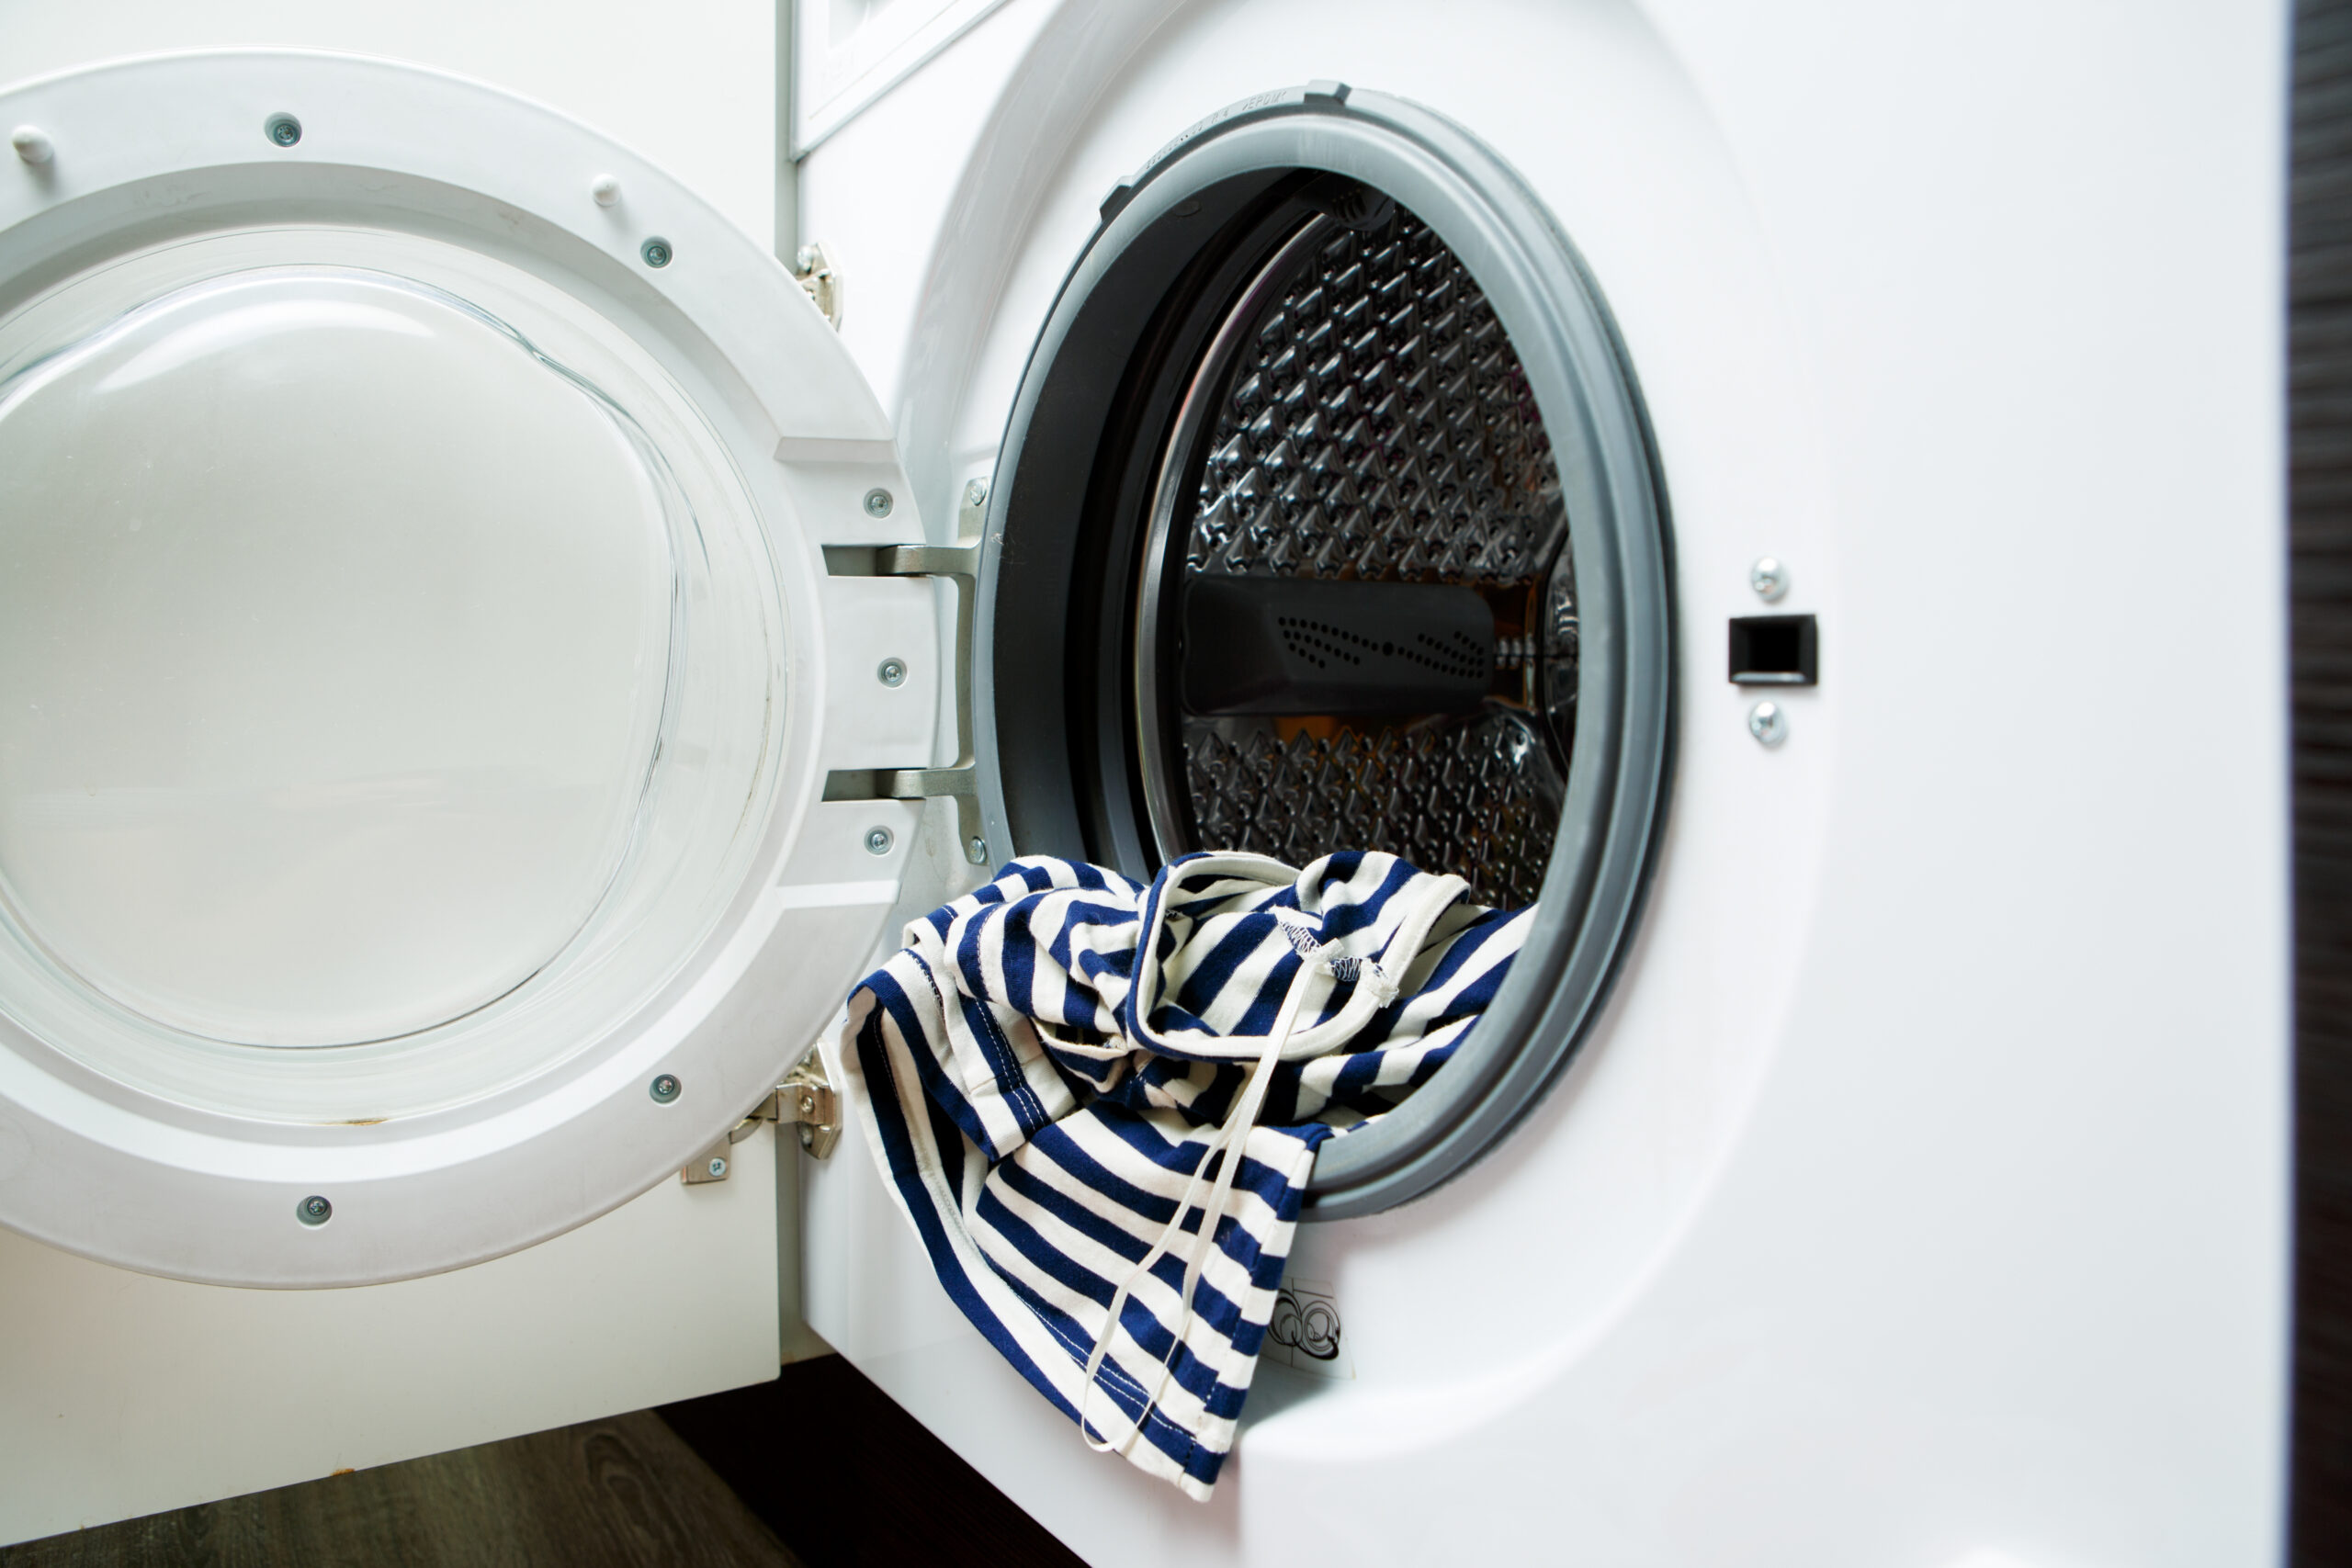 Spate of incidents prompts tumble dryer reminder